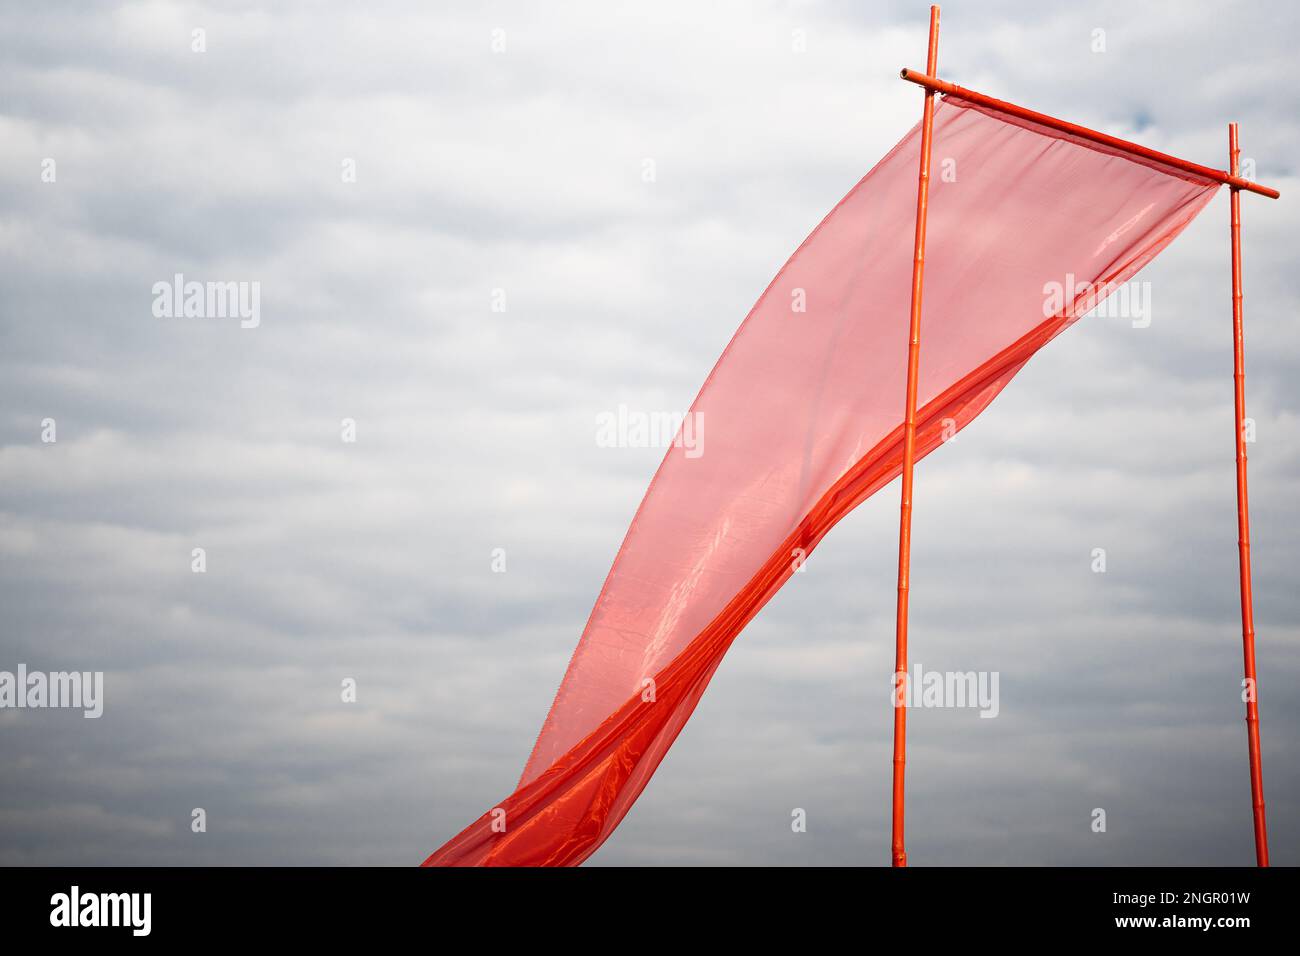 Red silk cloth flying or waving in air with white clouds Stock Photo